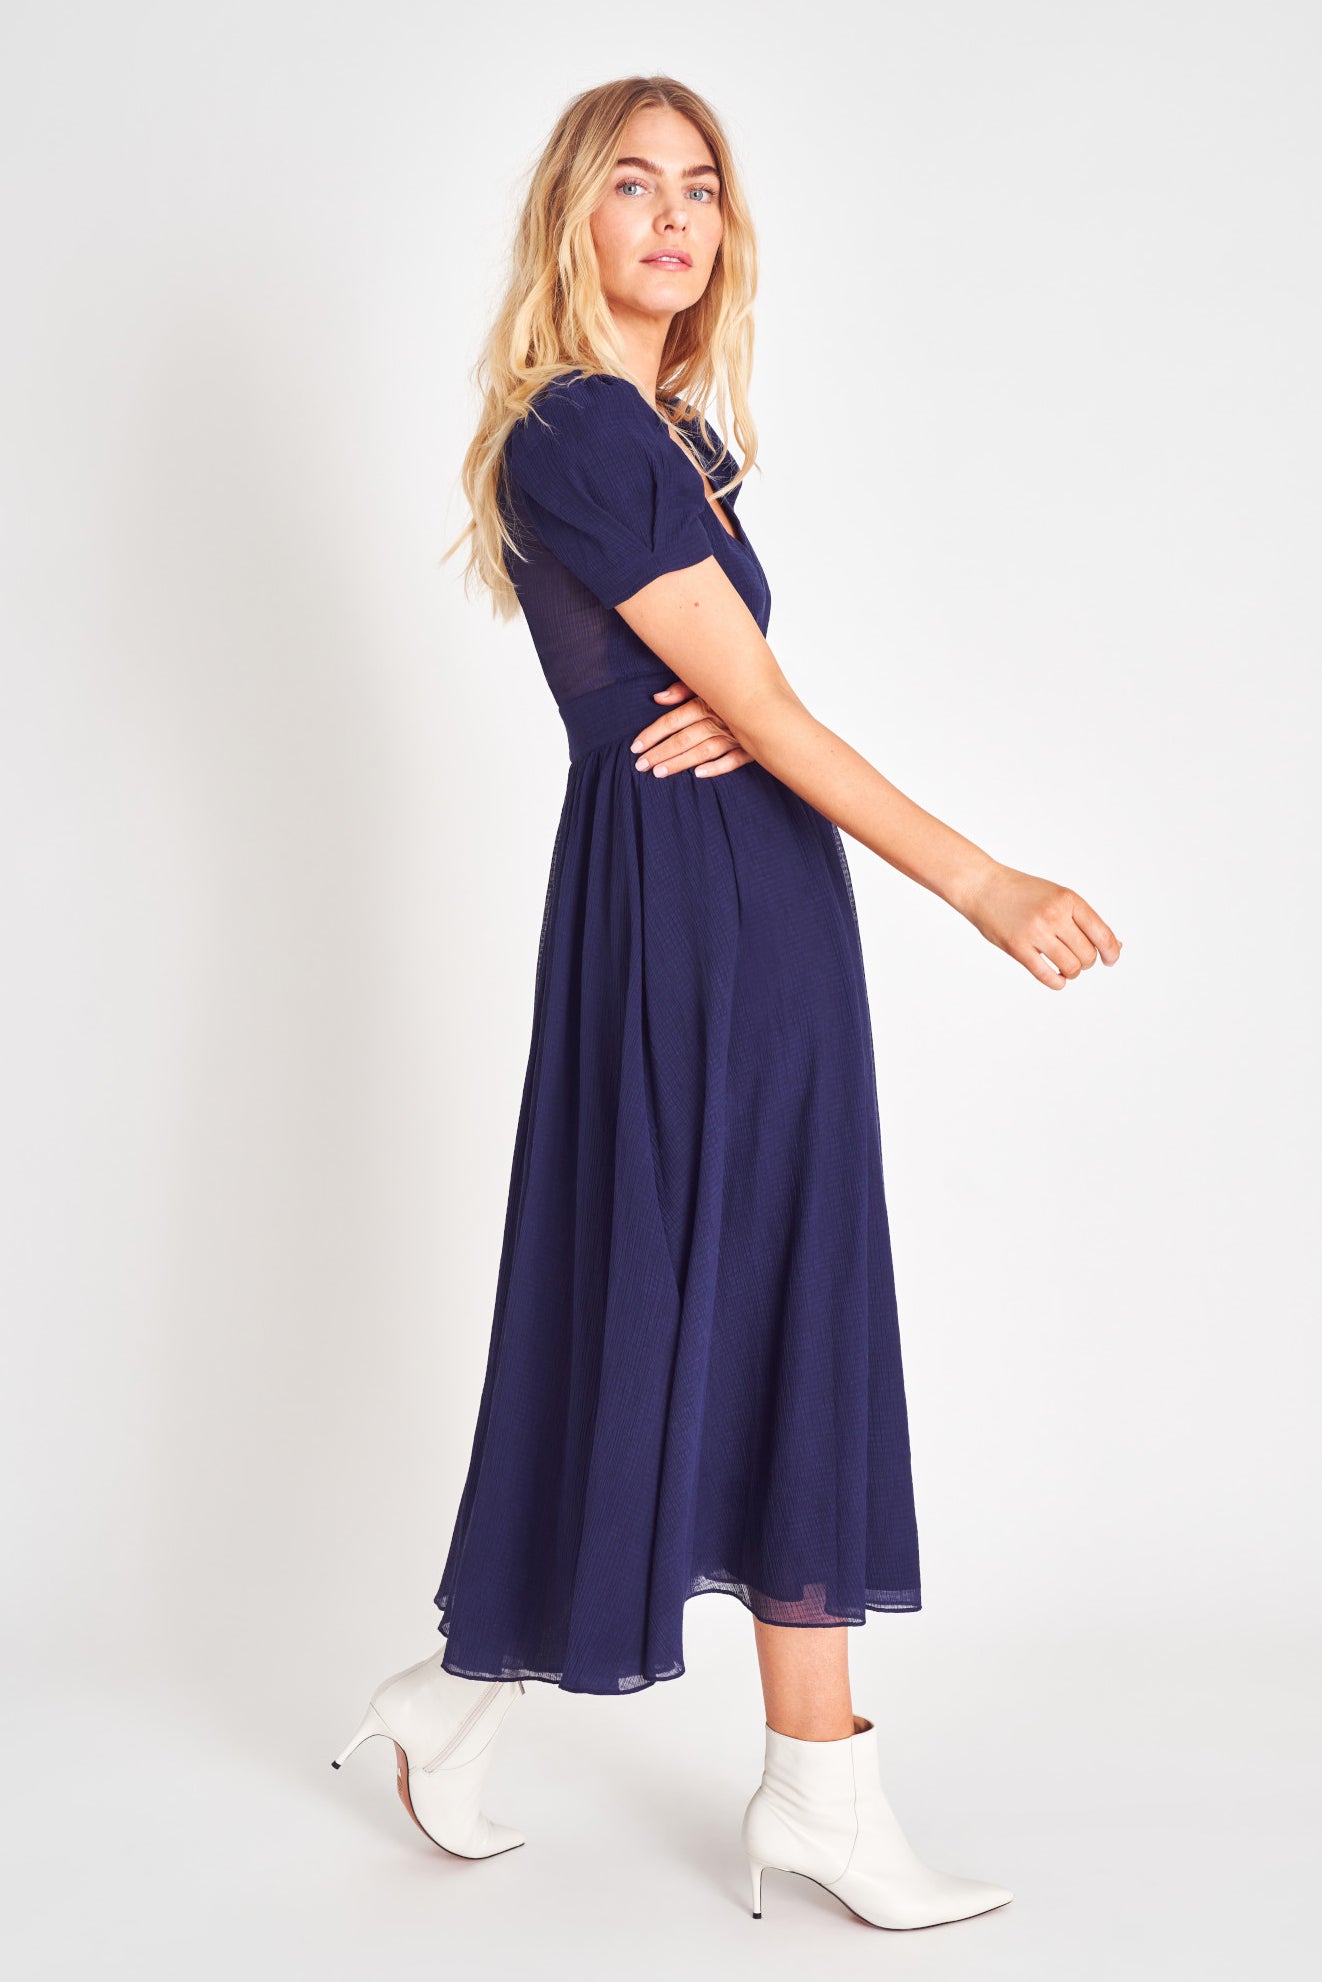 Puff sleeve v neck midi dress with fitted waist.